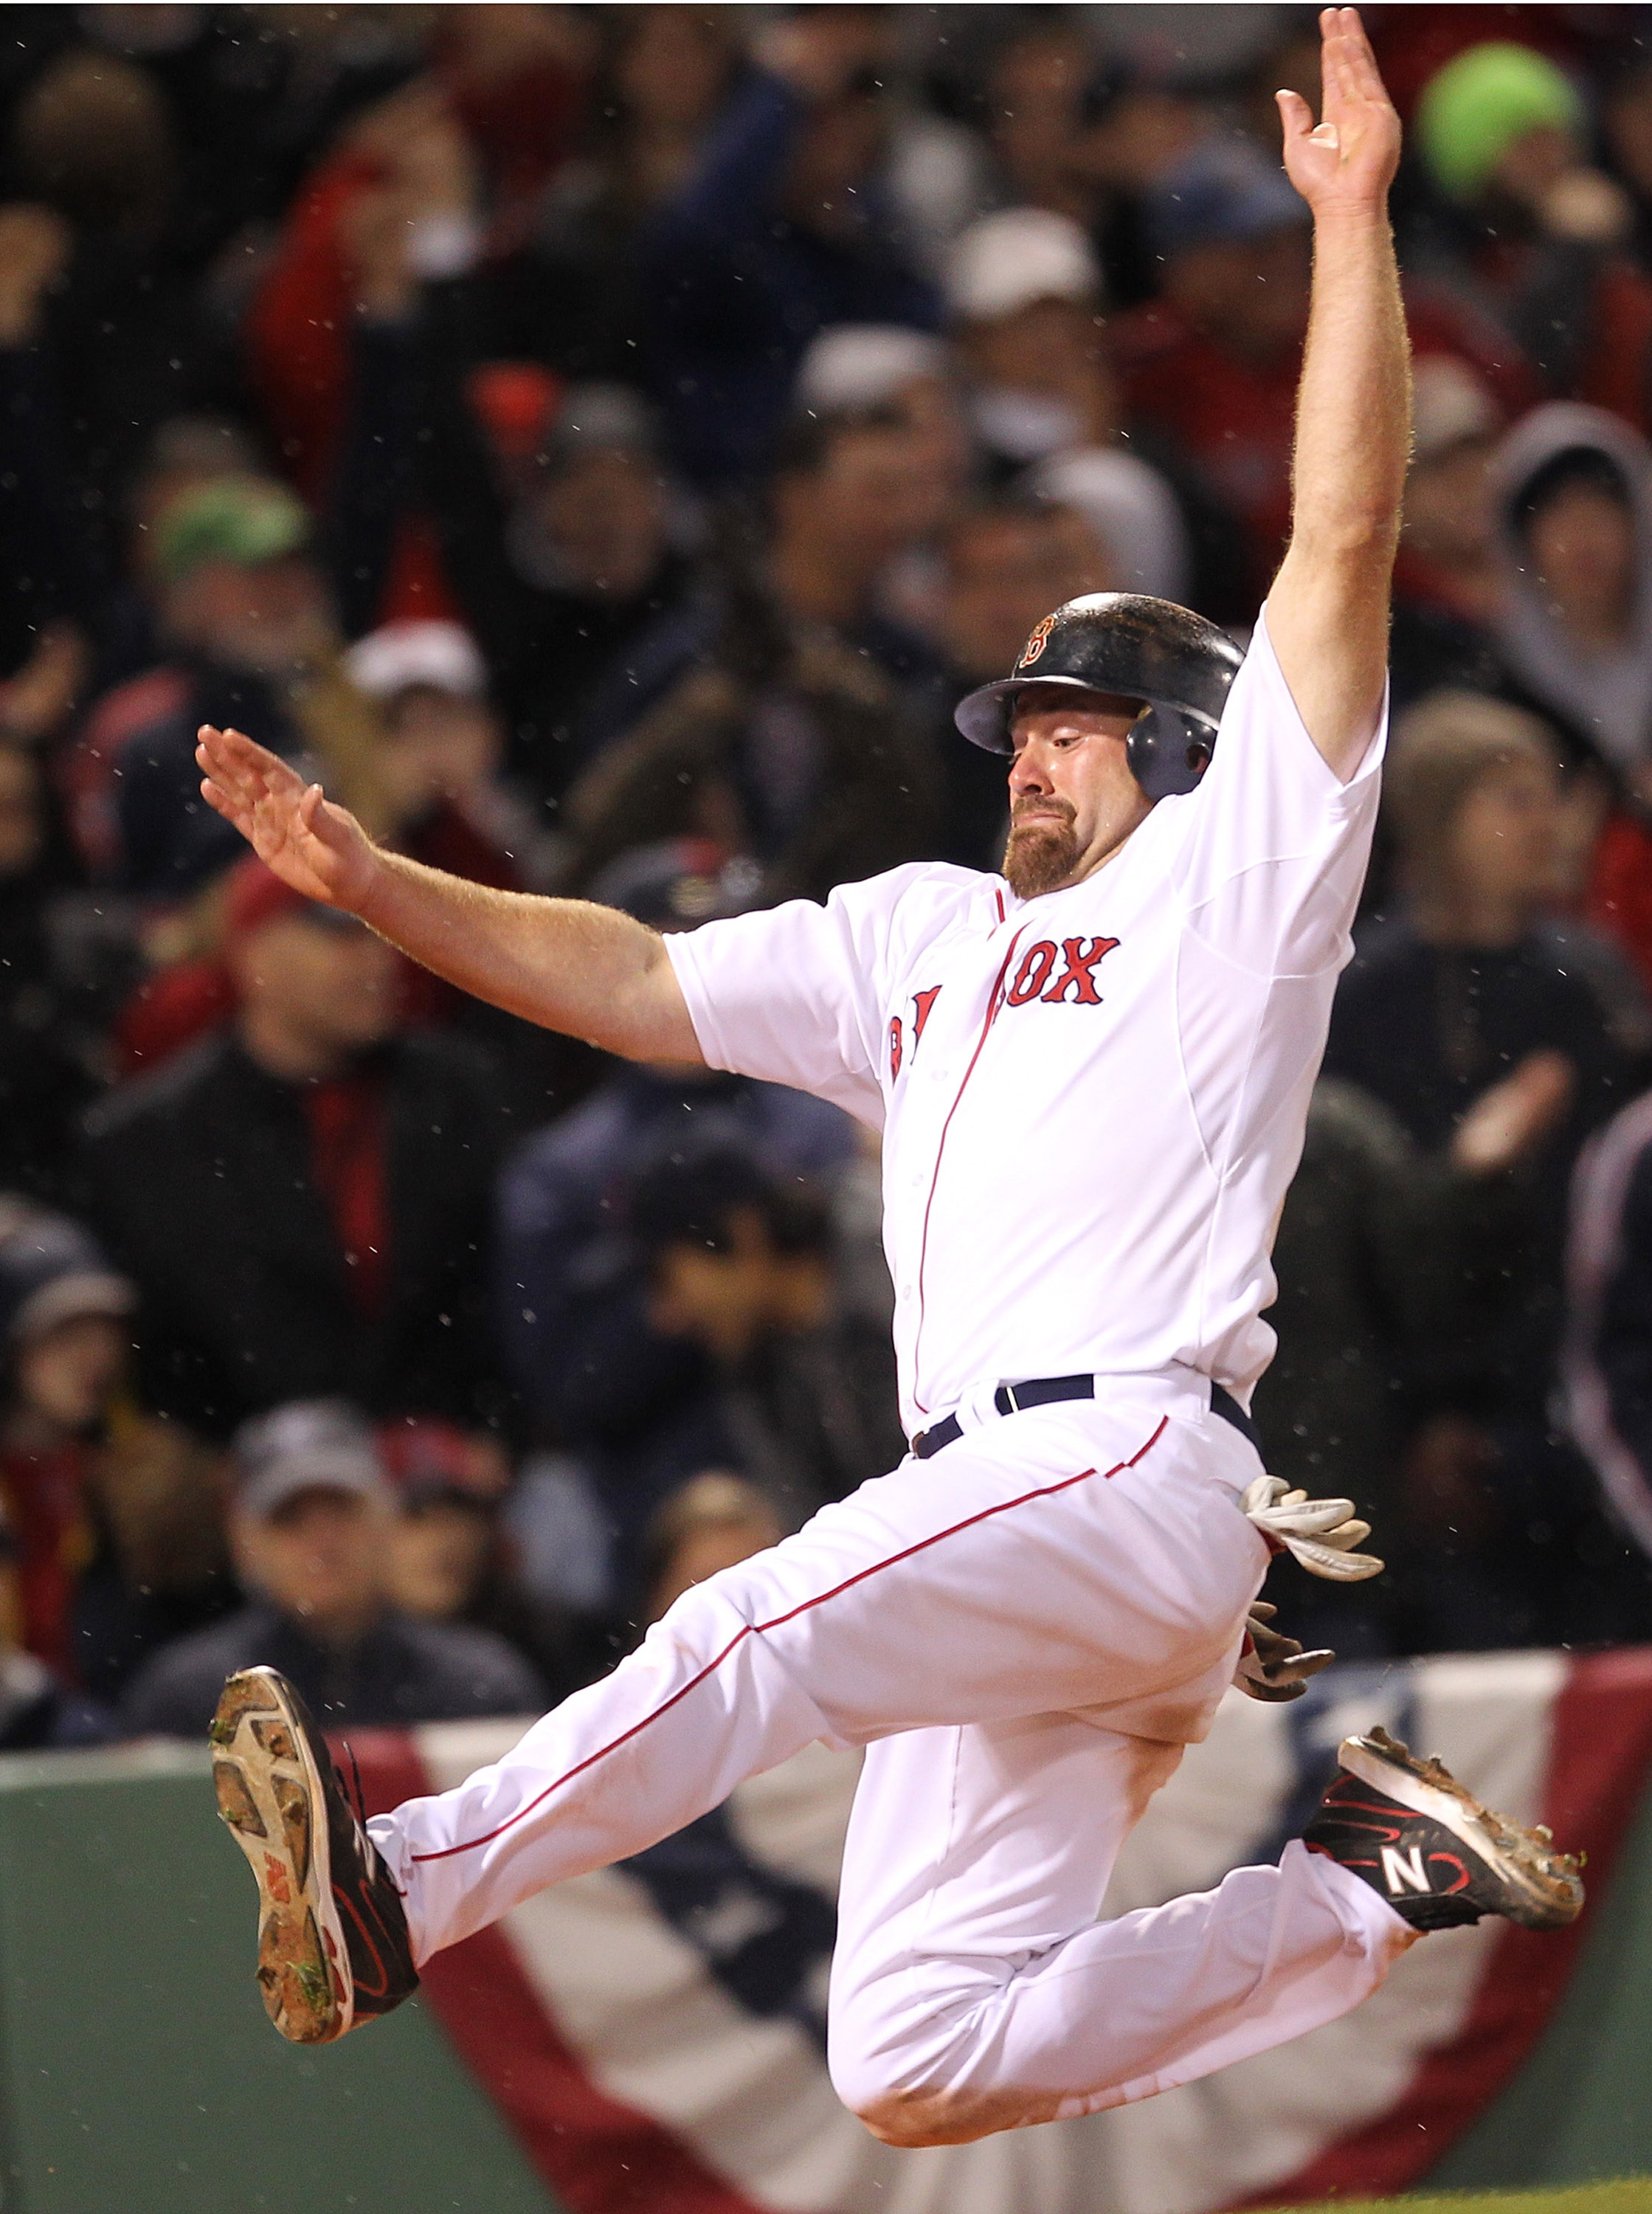 BOSTON, MA - APRIL 10:  Kevin Youkilis #20 of the Boston Red Sox scores a run on a double hit by  David Ortiz against the New York Yankees in the seventh inning at Fenway Park April 10, 2011 in Boston, Massachusetts. (Photo by Jim Rogash/Getty Images)